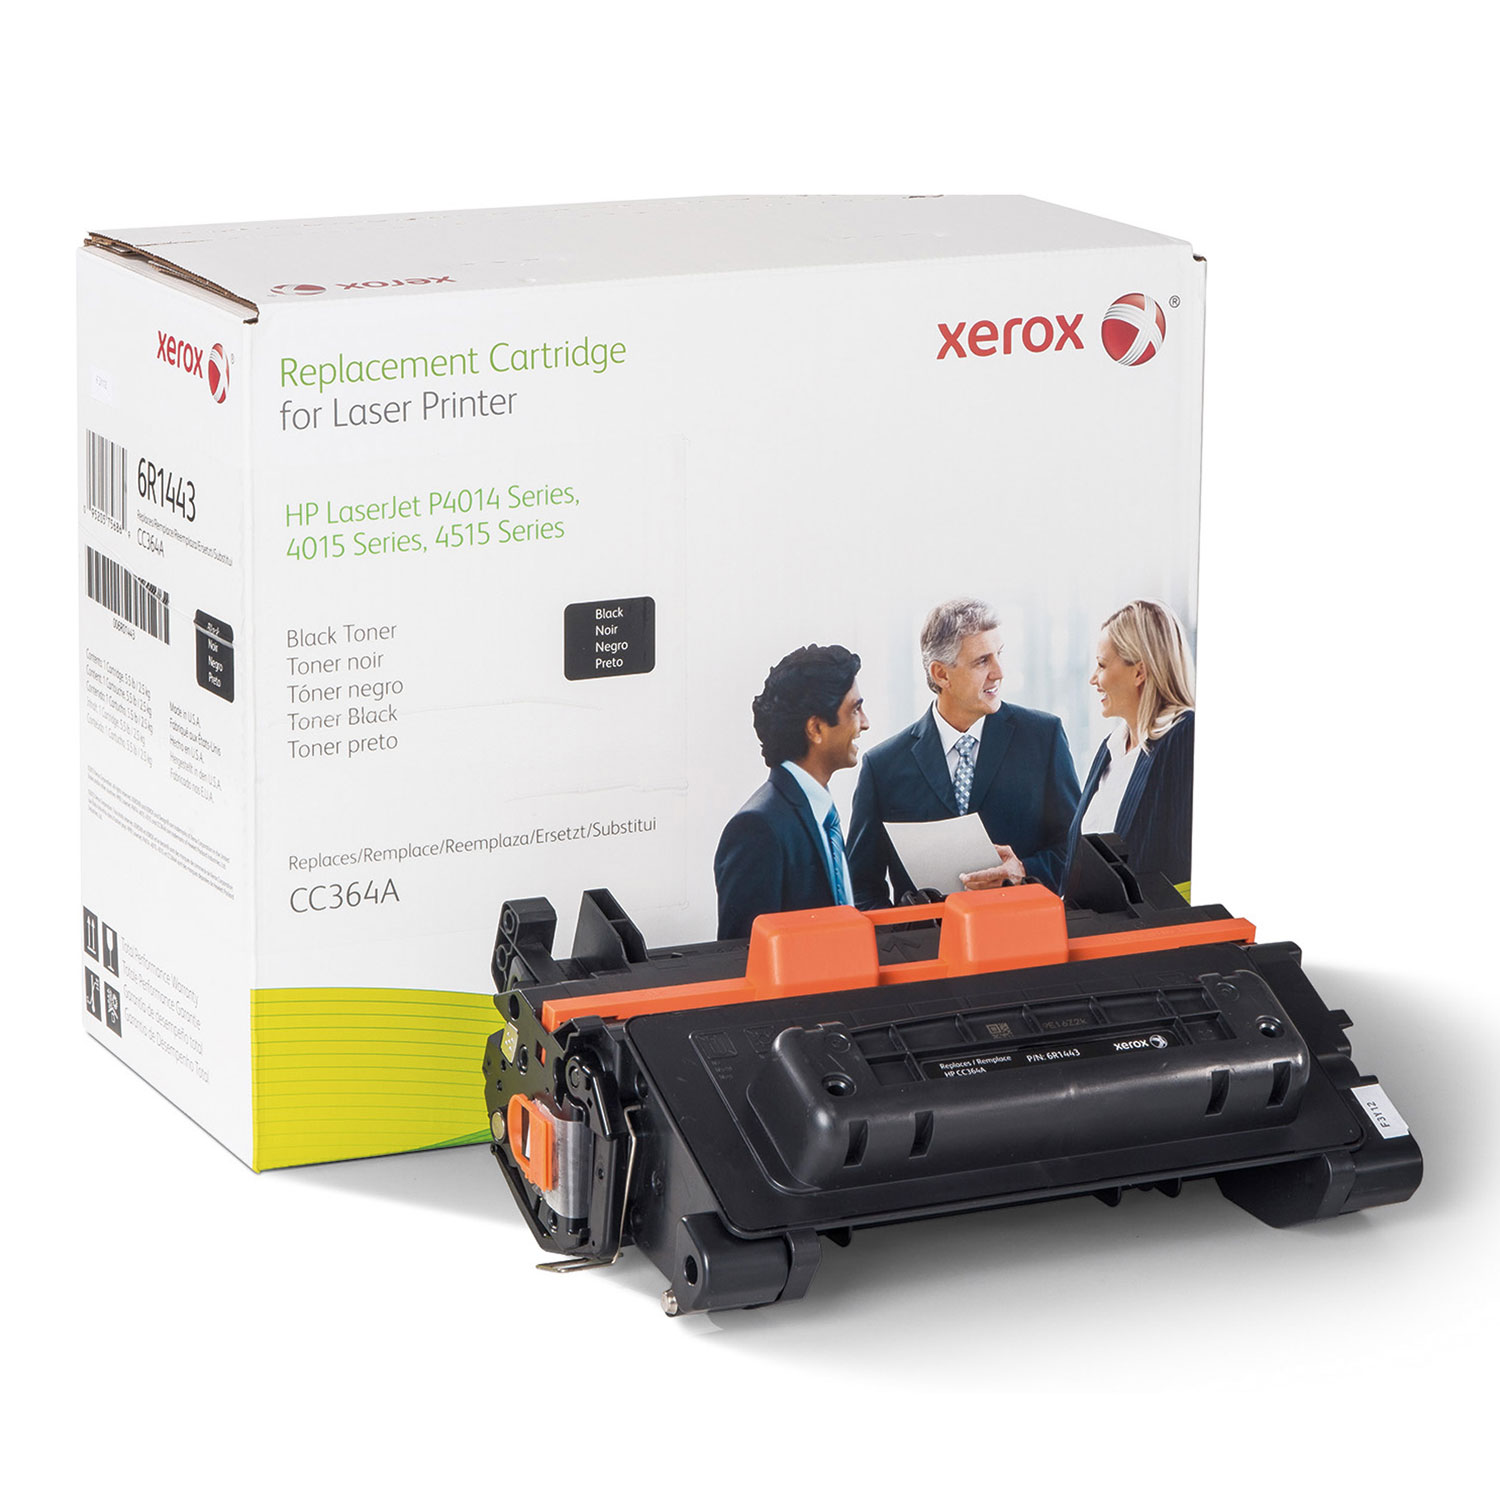  Xerox 006R01443 006R01443 Replacement Toner for CC364A (64A), 11700 Page Yield, Black (XER006R01443) 